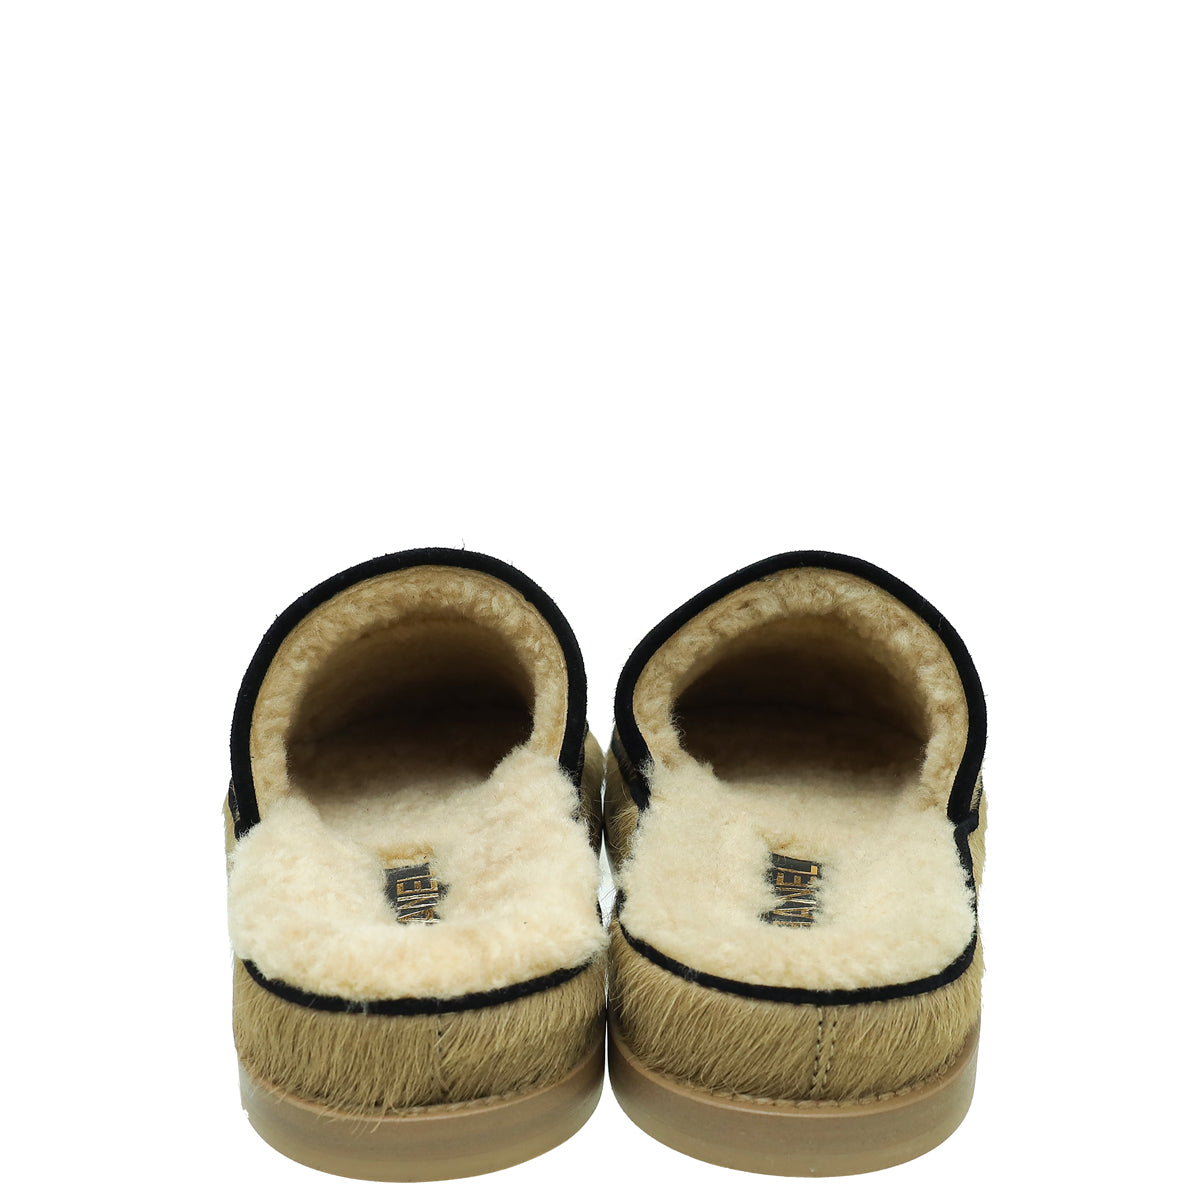 Chanel Bicolor CC Pony Hair and Shearling Mules 37